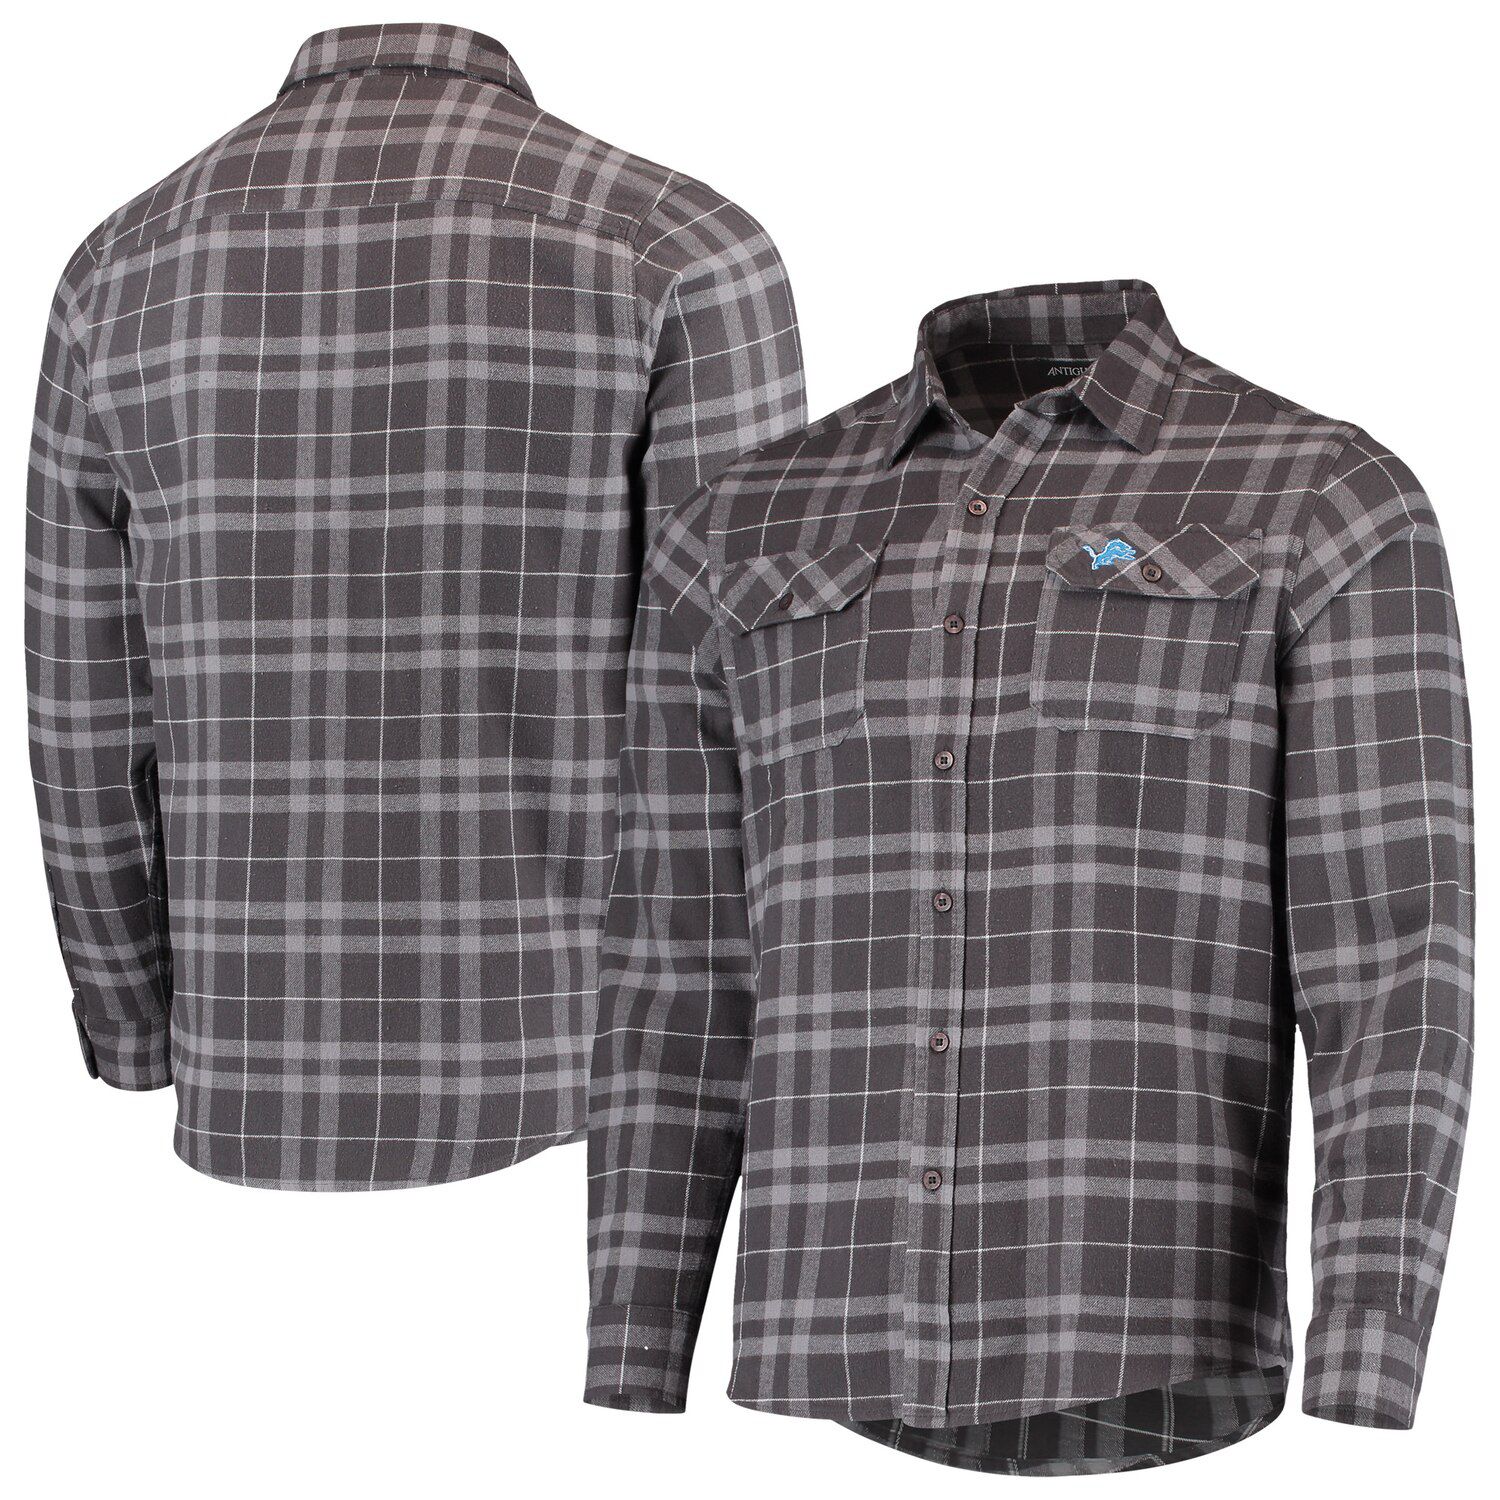 Stance Flannel Button-Up Long Sleeve Shirt